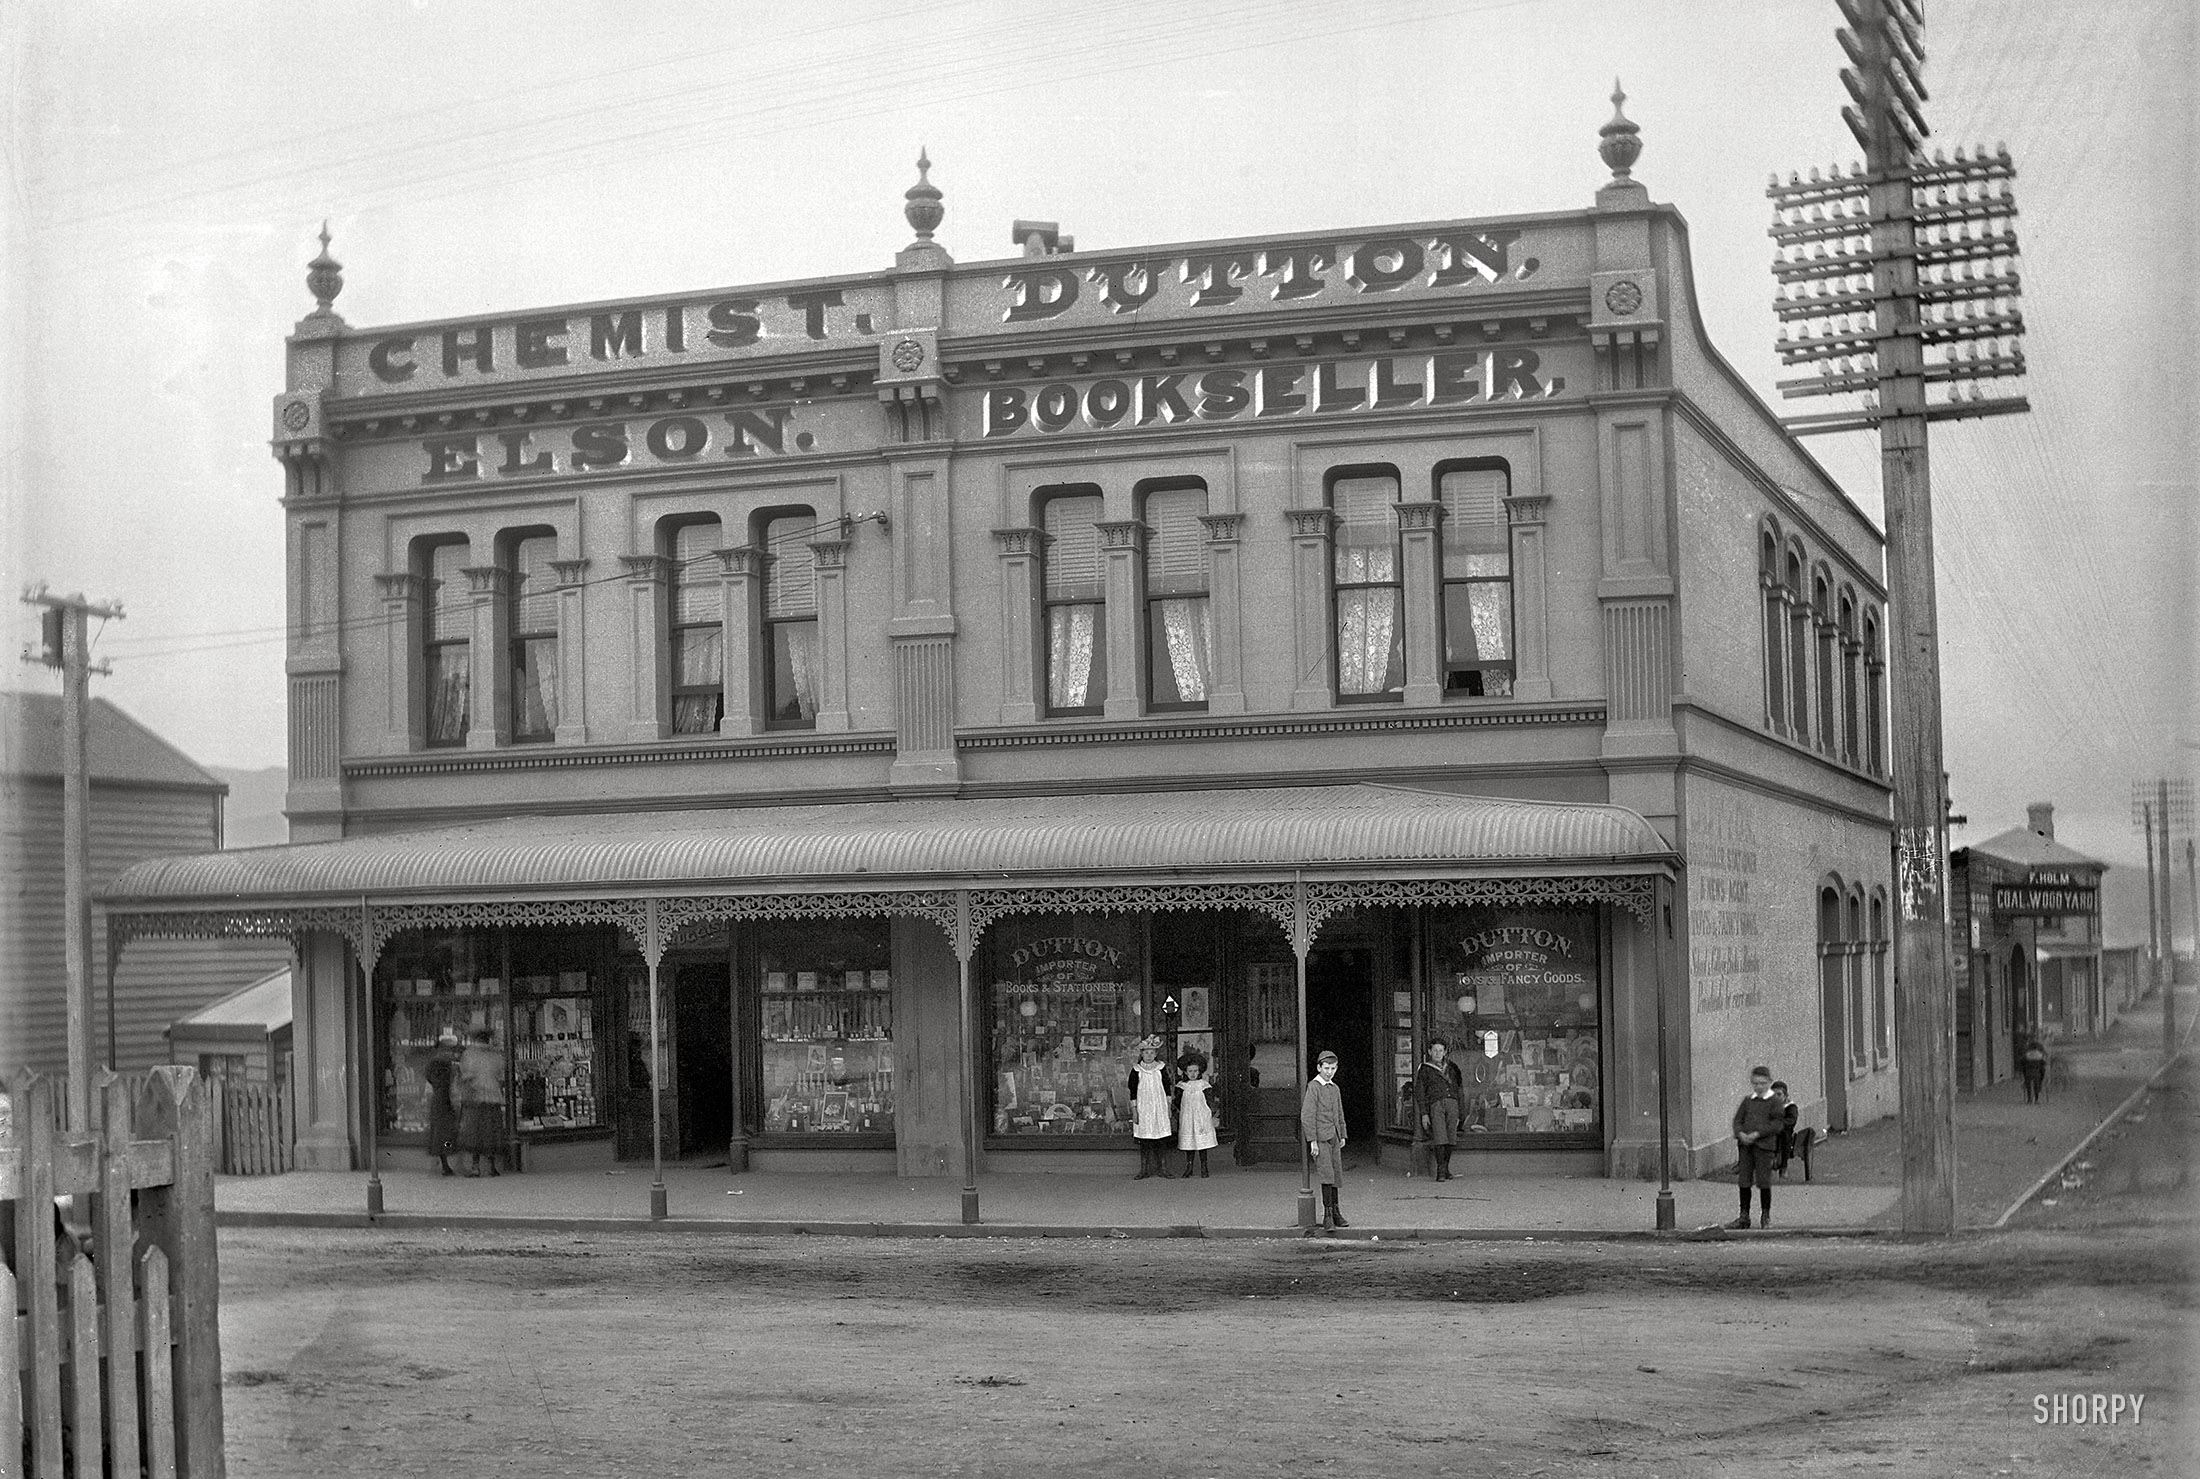 "Elson chemist and Dutton bookshop on Courtenay Place, Wellington, between 1896 and 1897." Glass negative by Frederick James Halse. View full size.